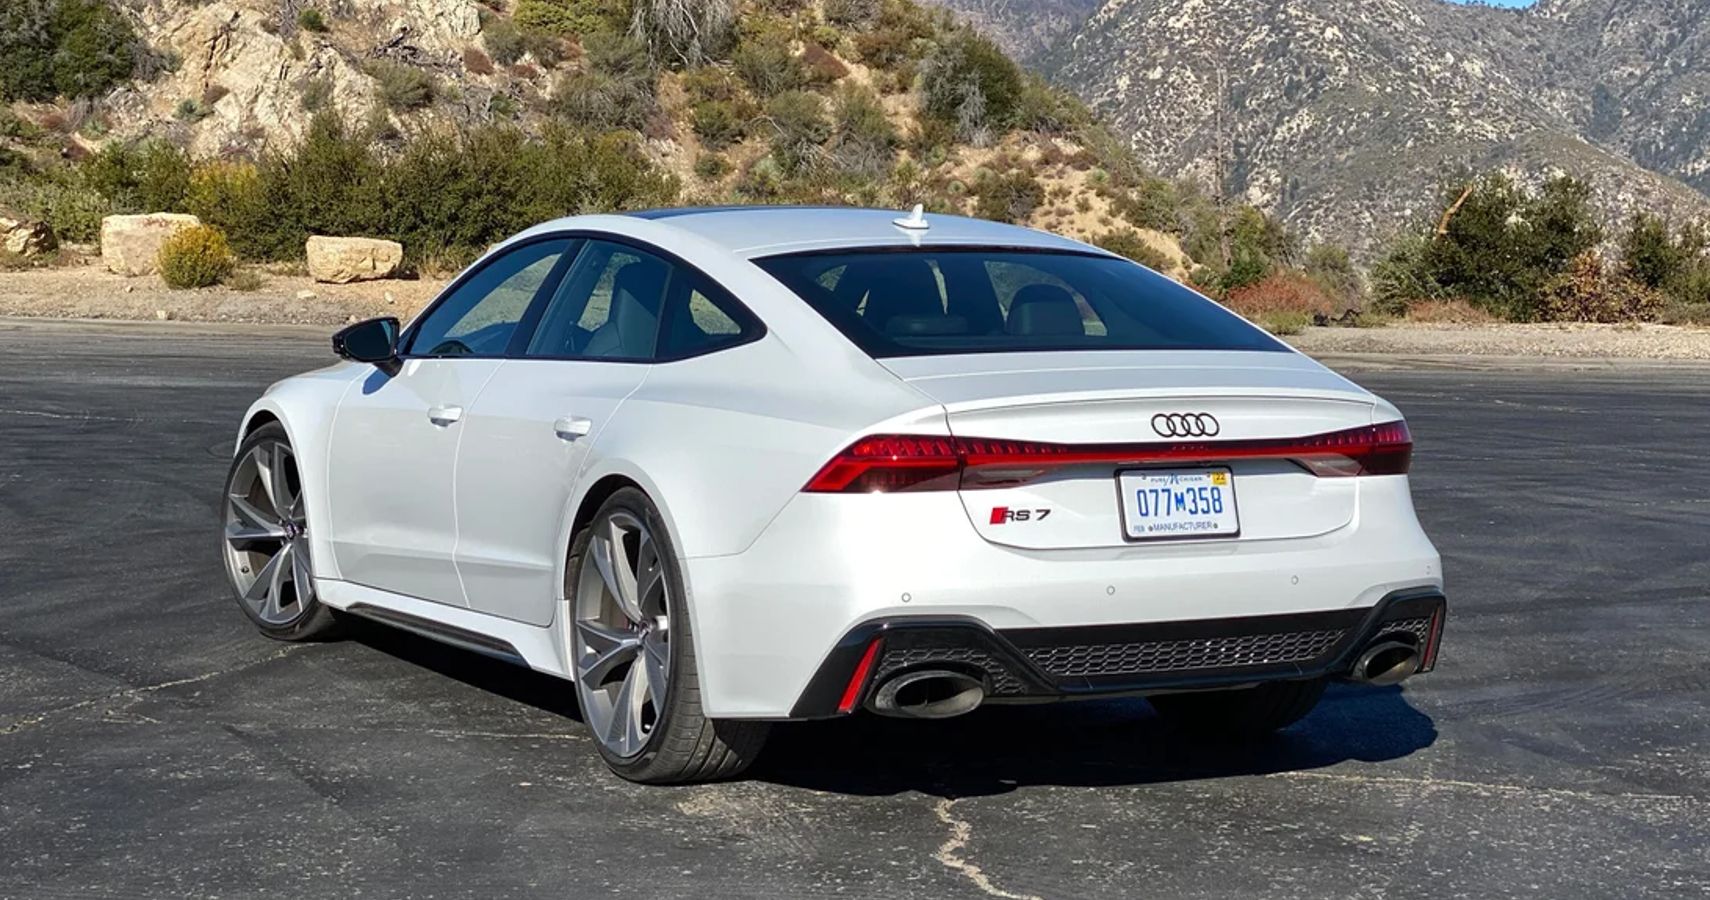 The 2021 Audi RS7